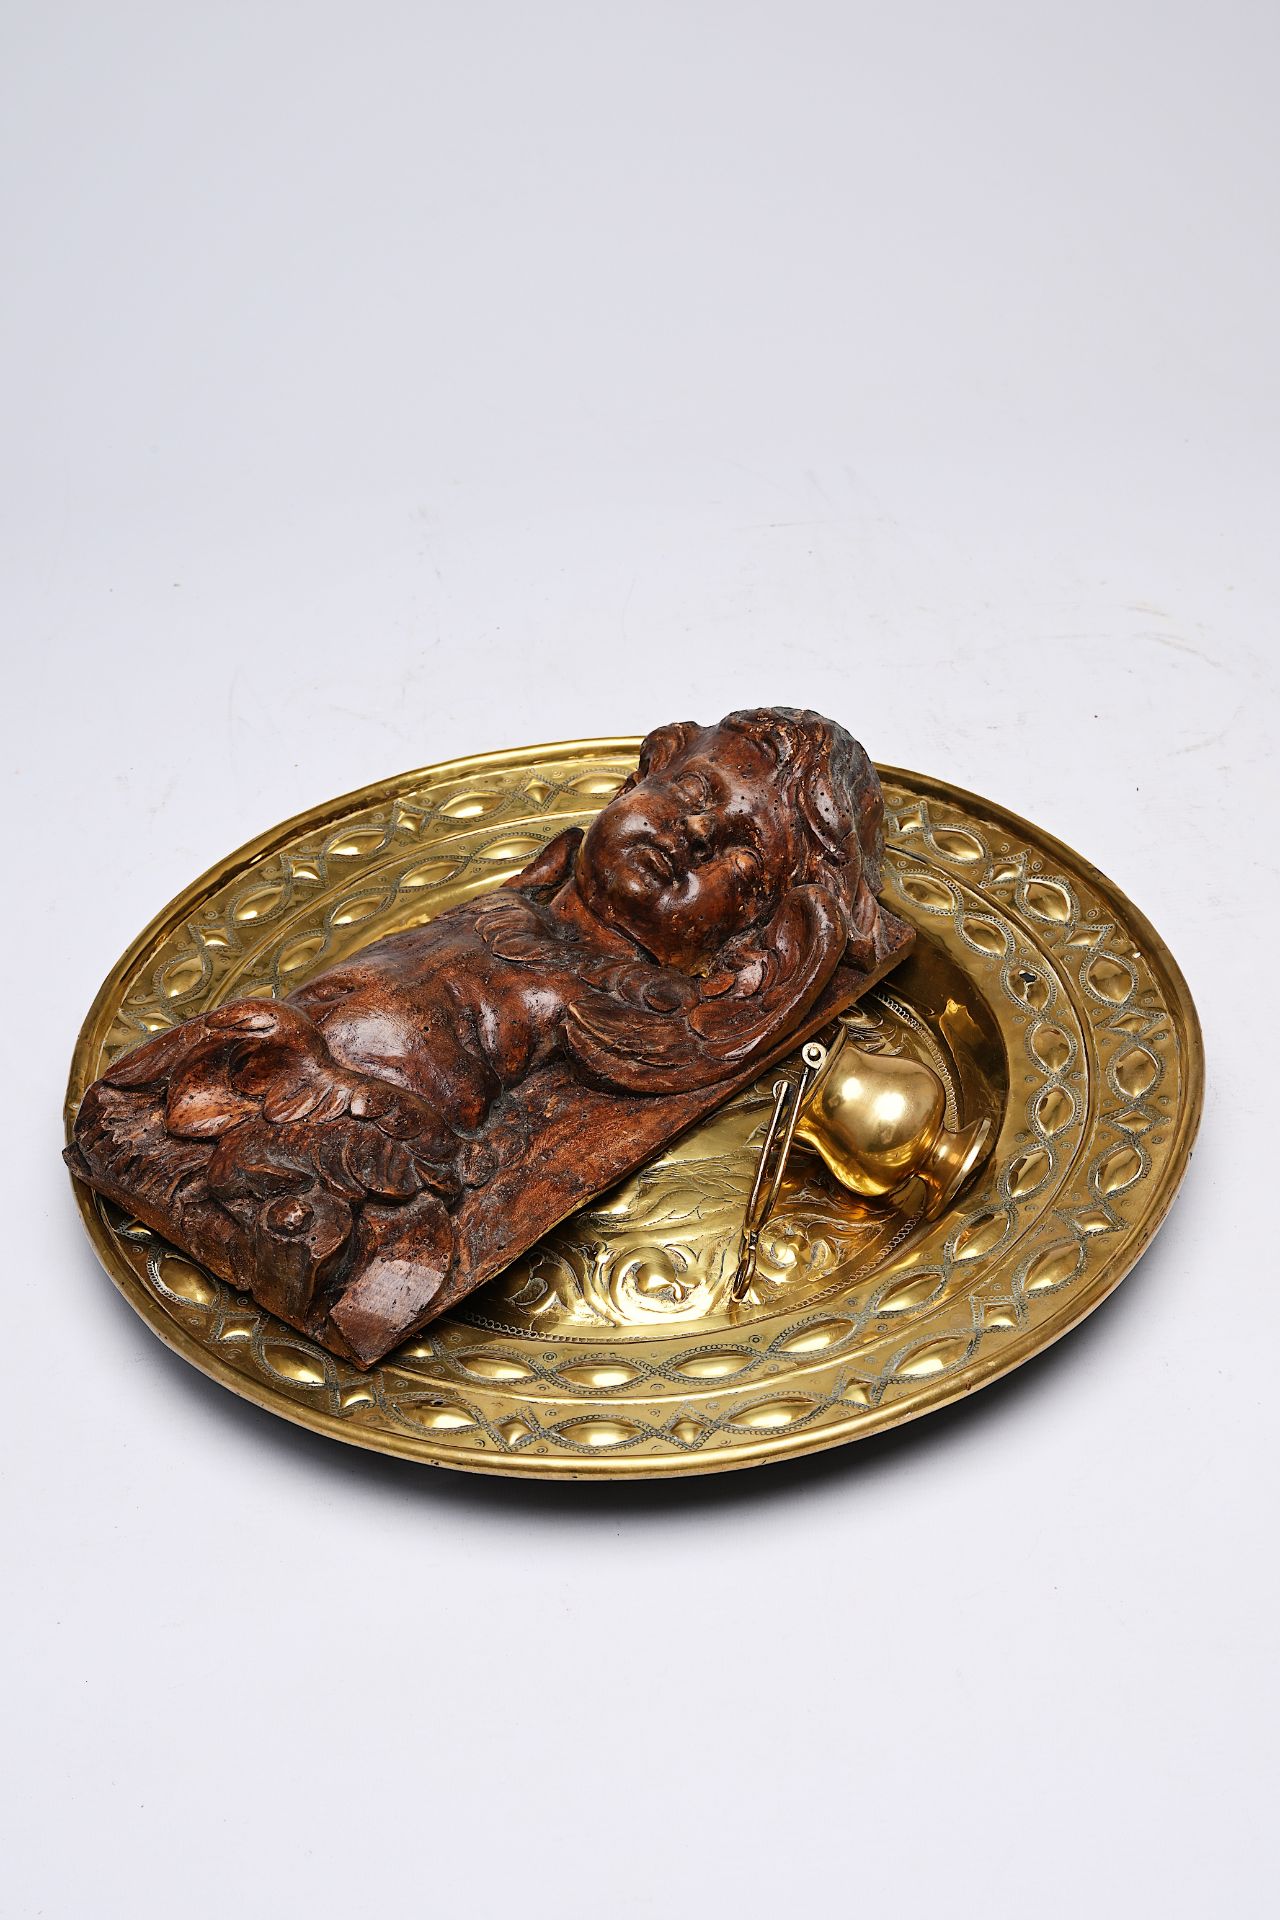 A German brass 'Adam and Eve' alms dish, a holy water font and a carved wood putto, 17th/18th C. - Image 3 of 4